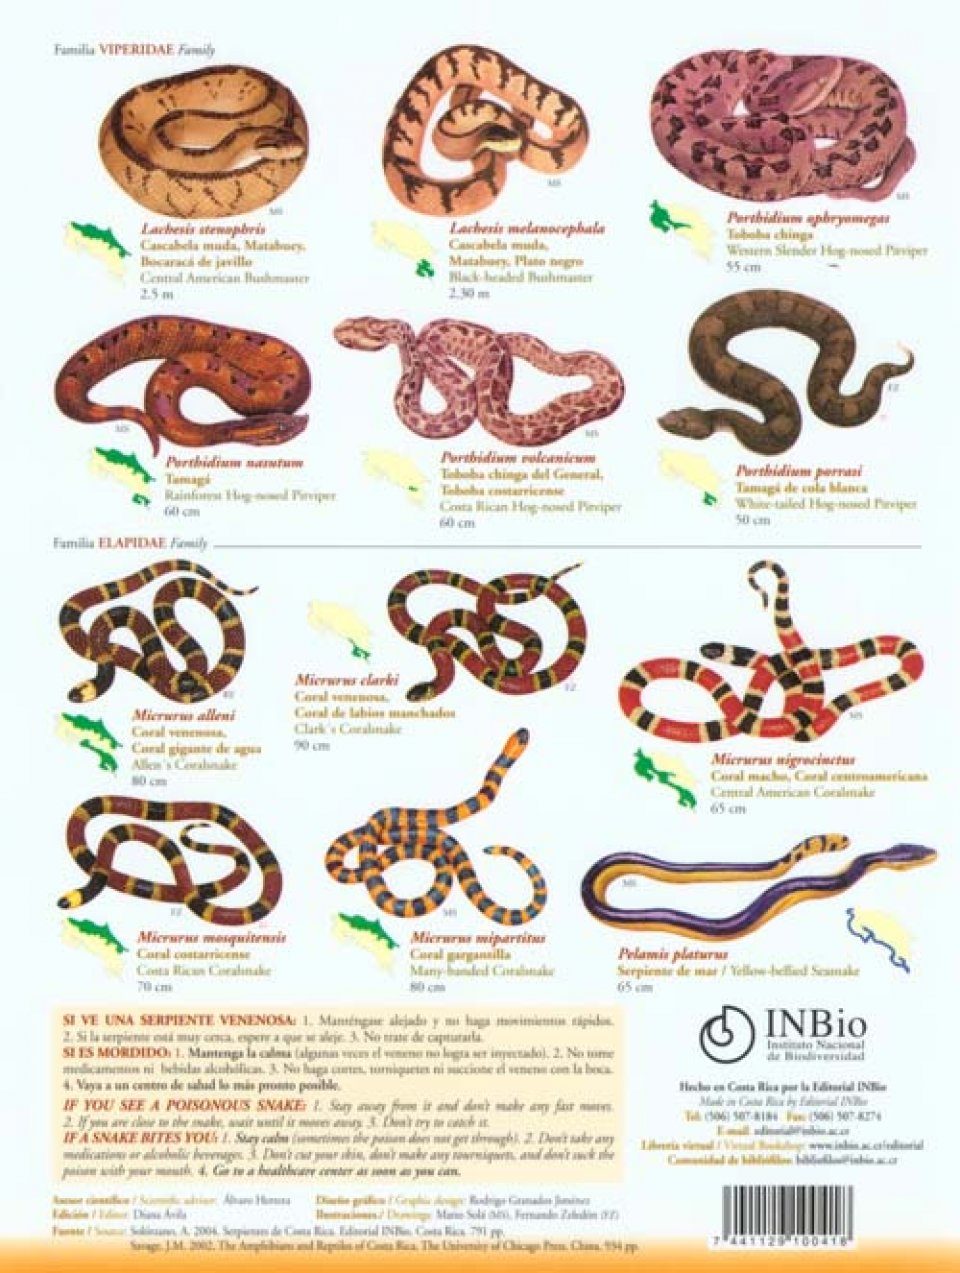 Snakes Of Texas Chart